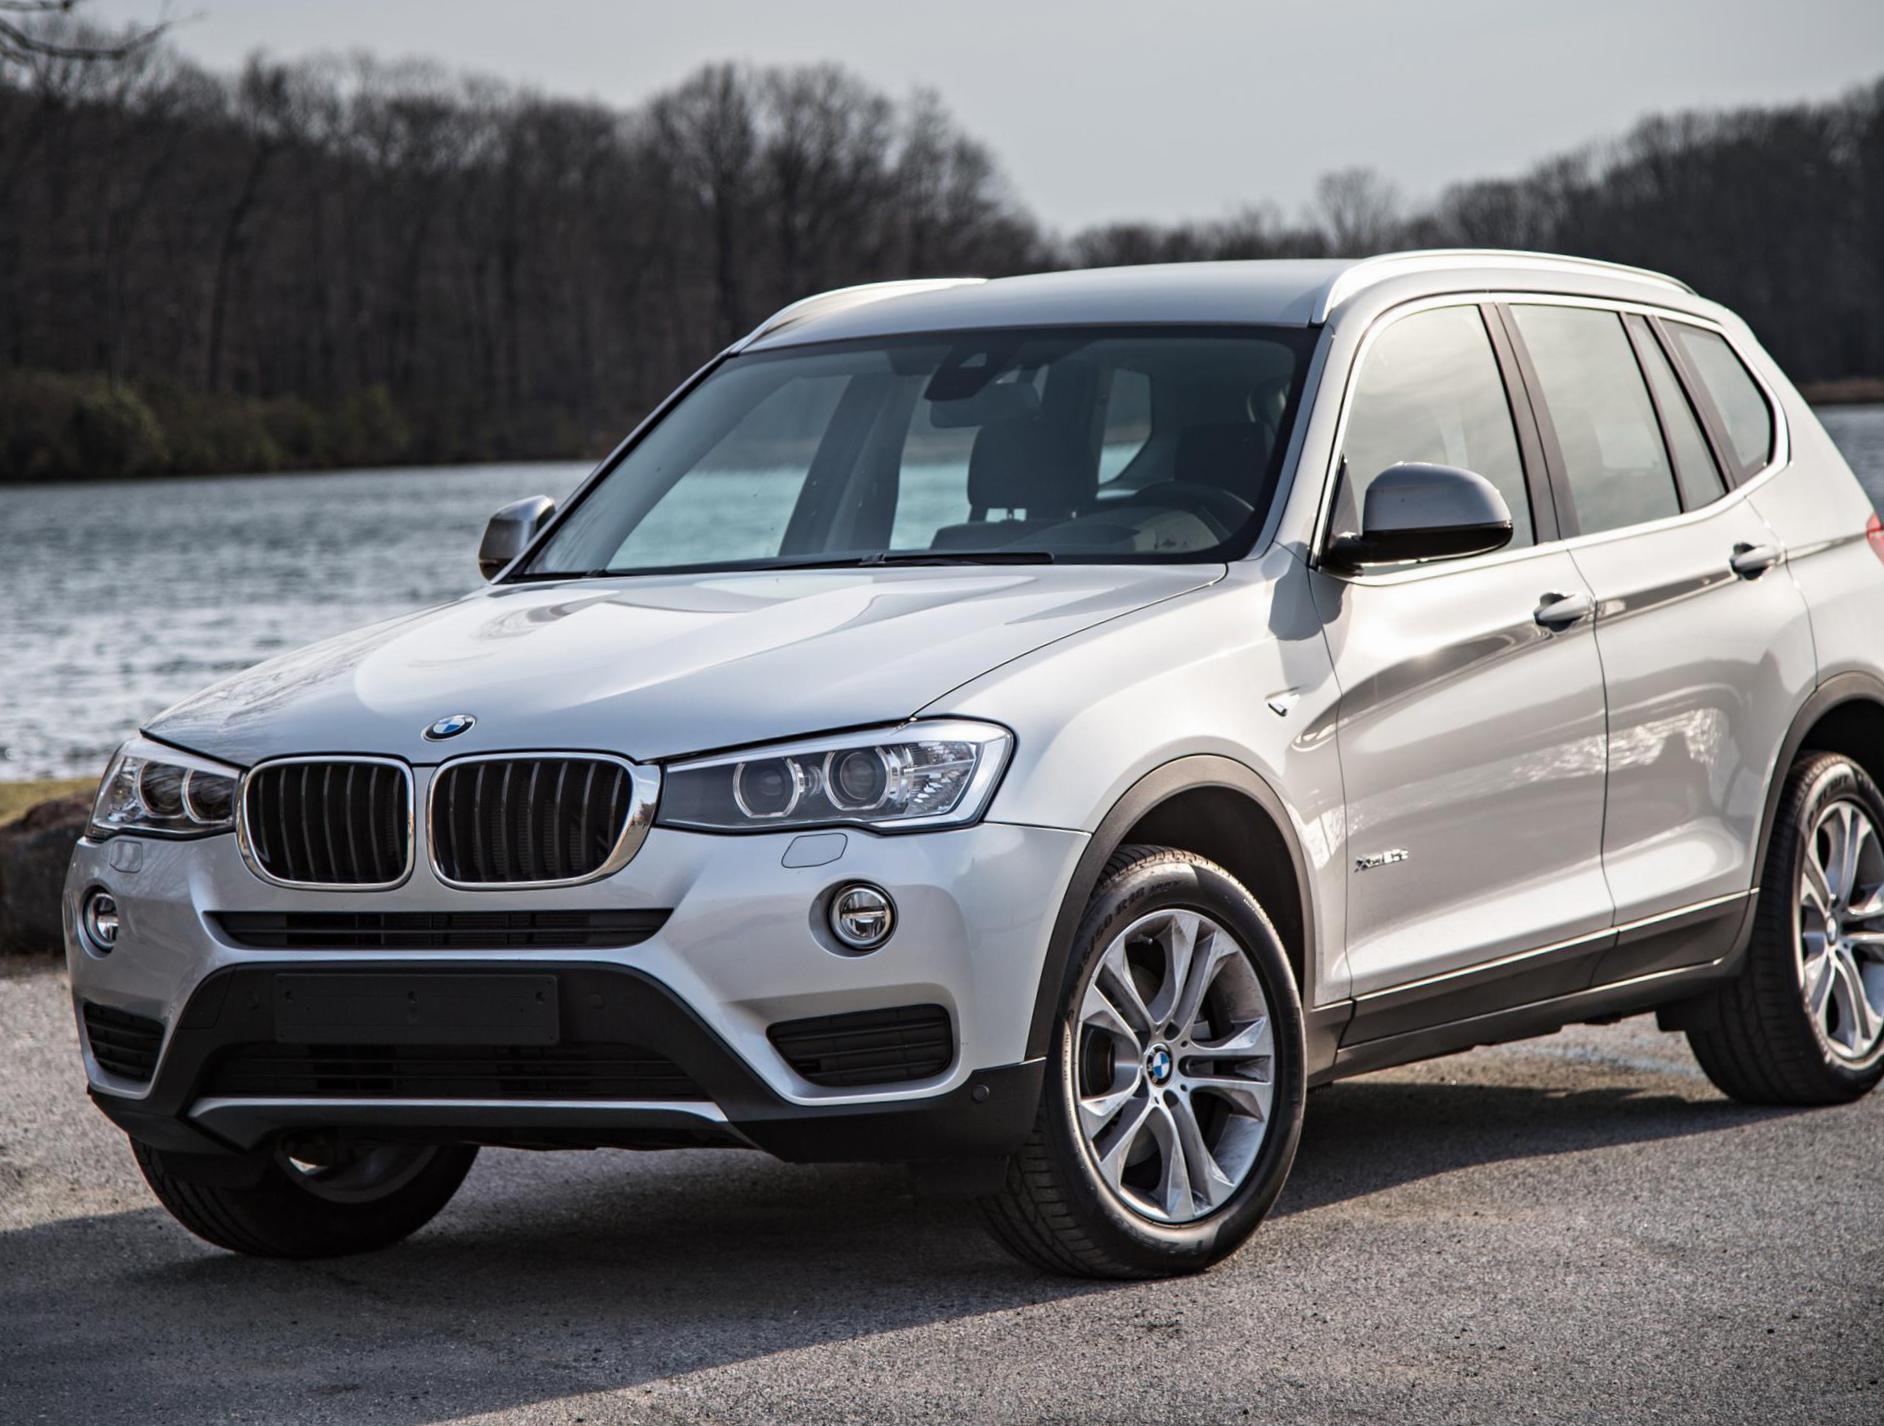 BMW X3 (F25) review 2013